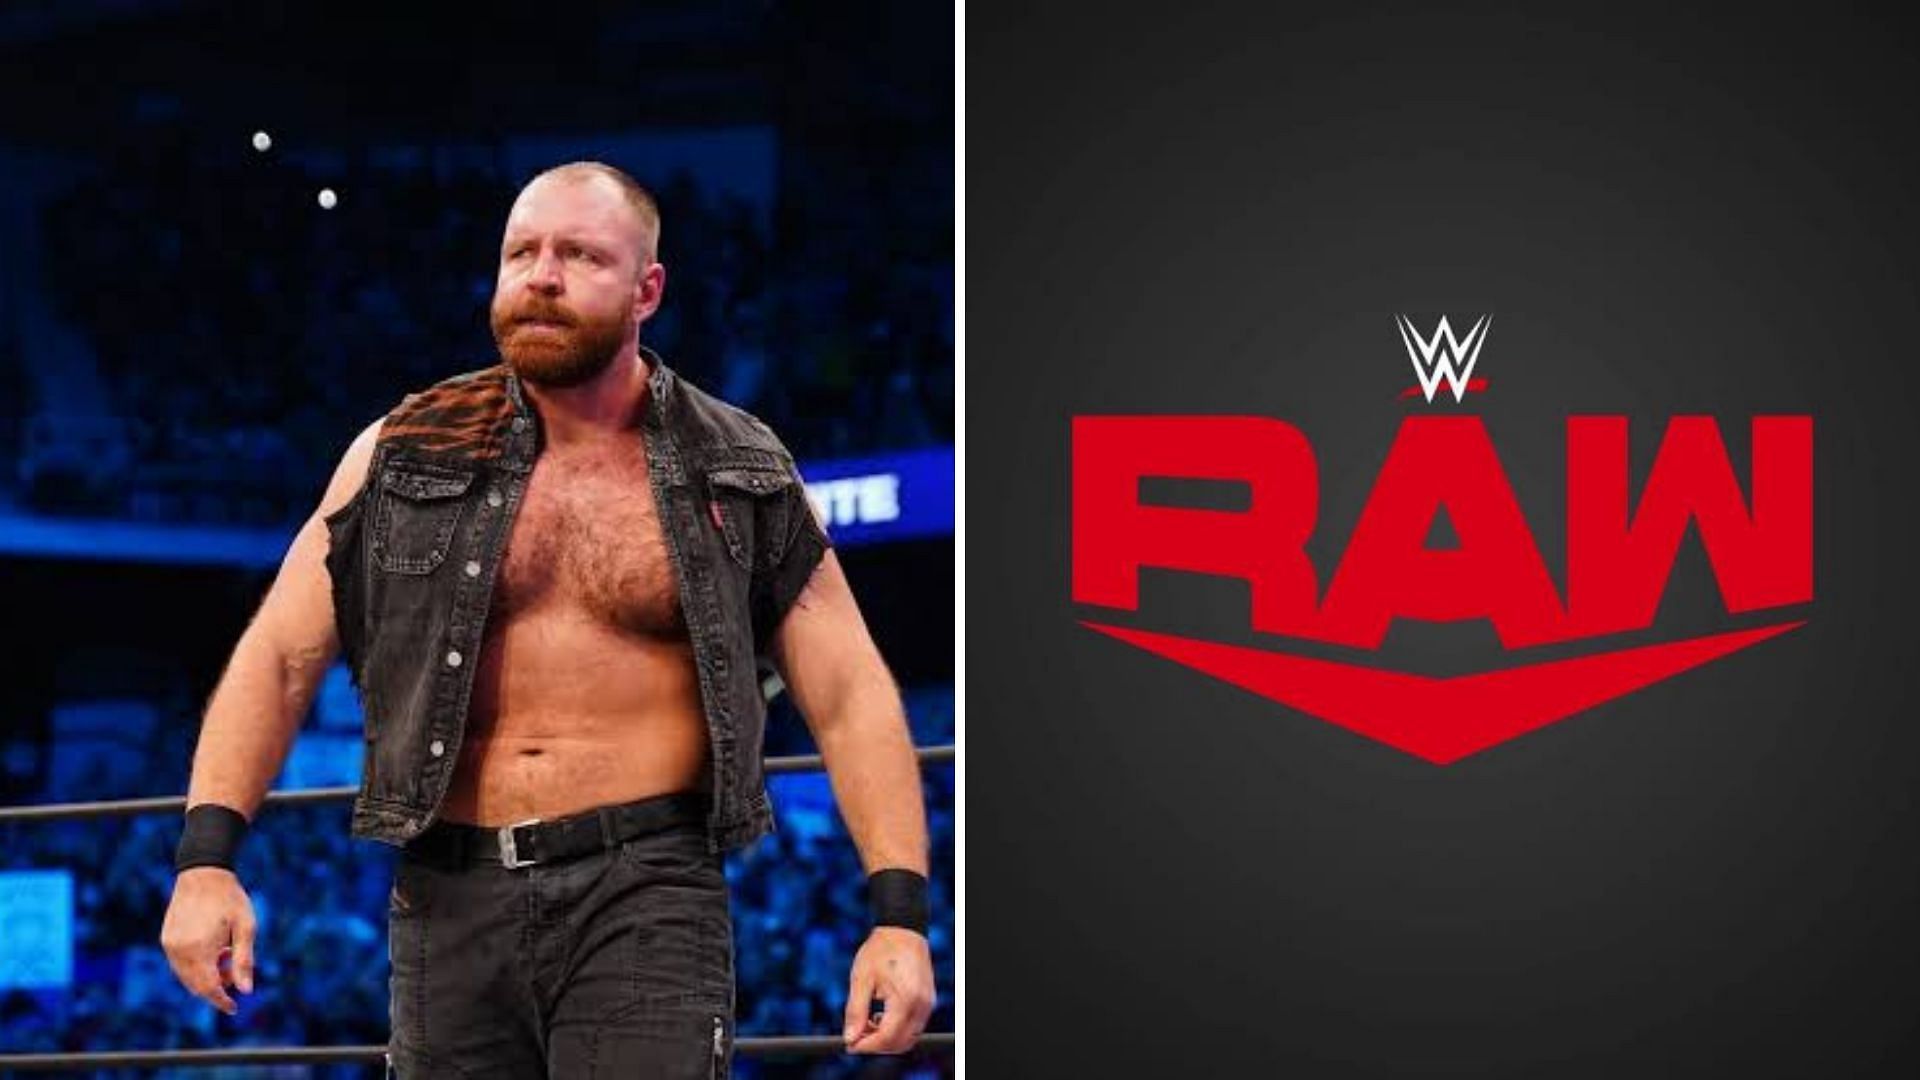 This former RAW Superstar wants a rematch with Jon Moxley